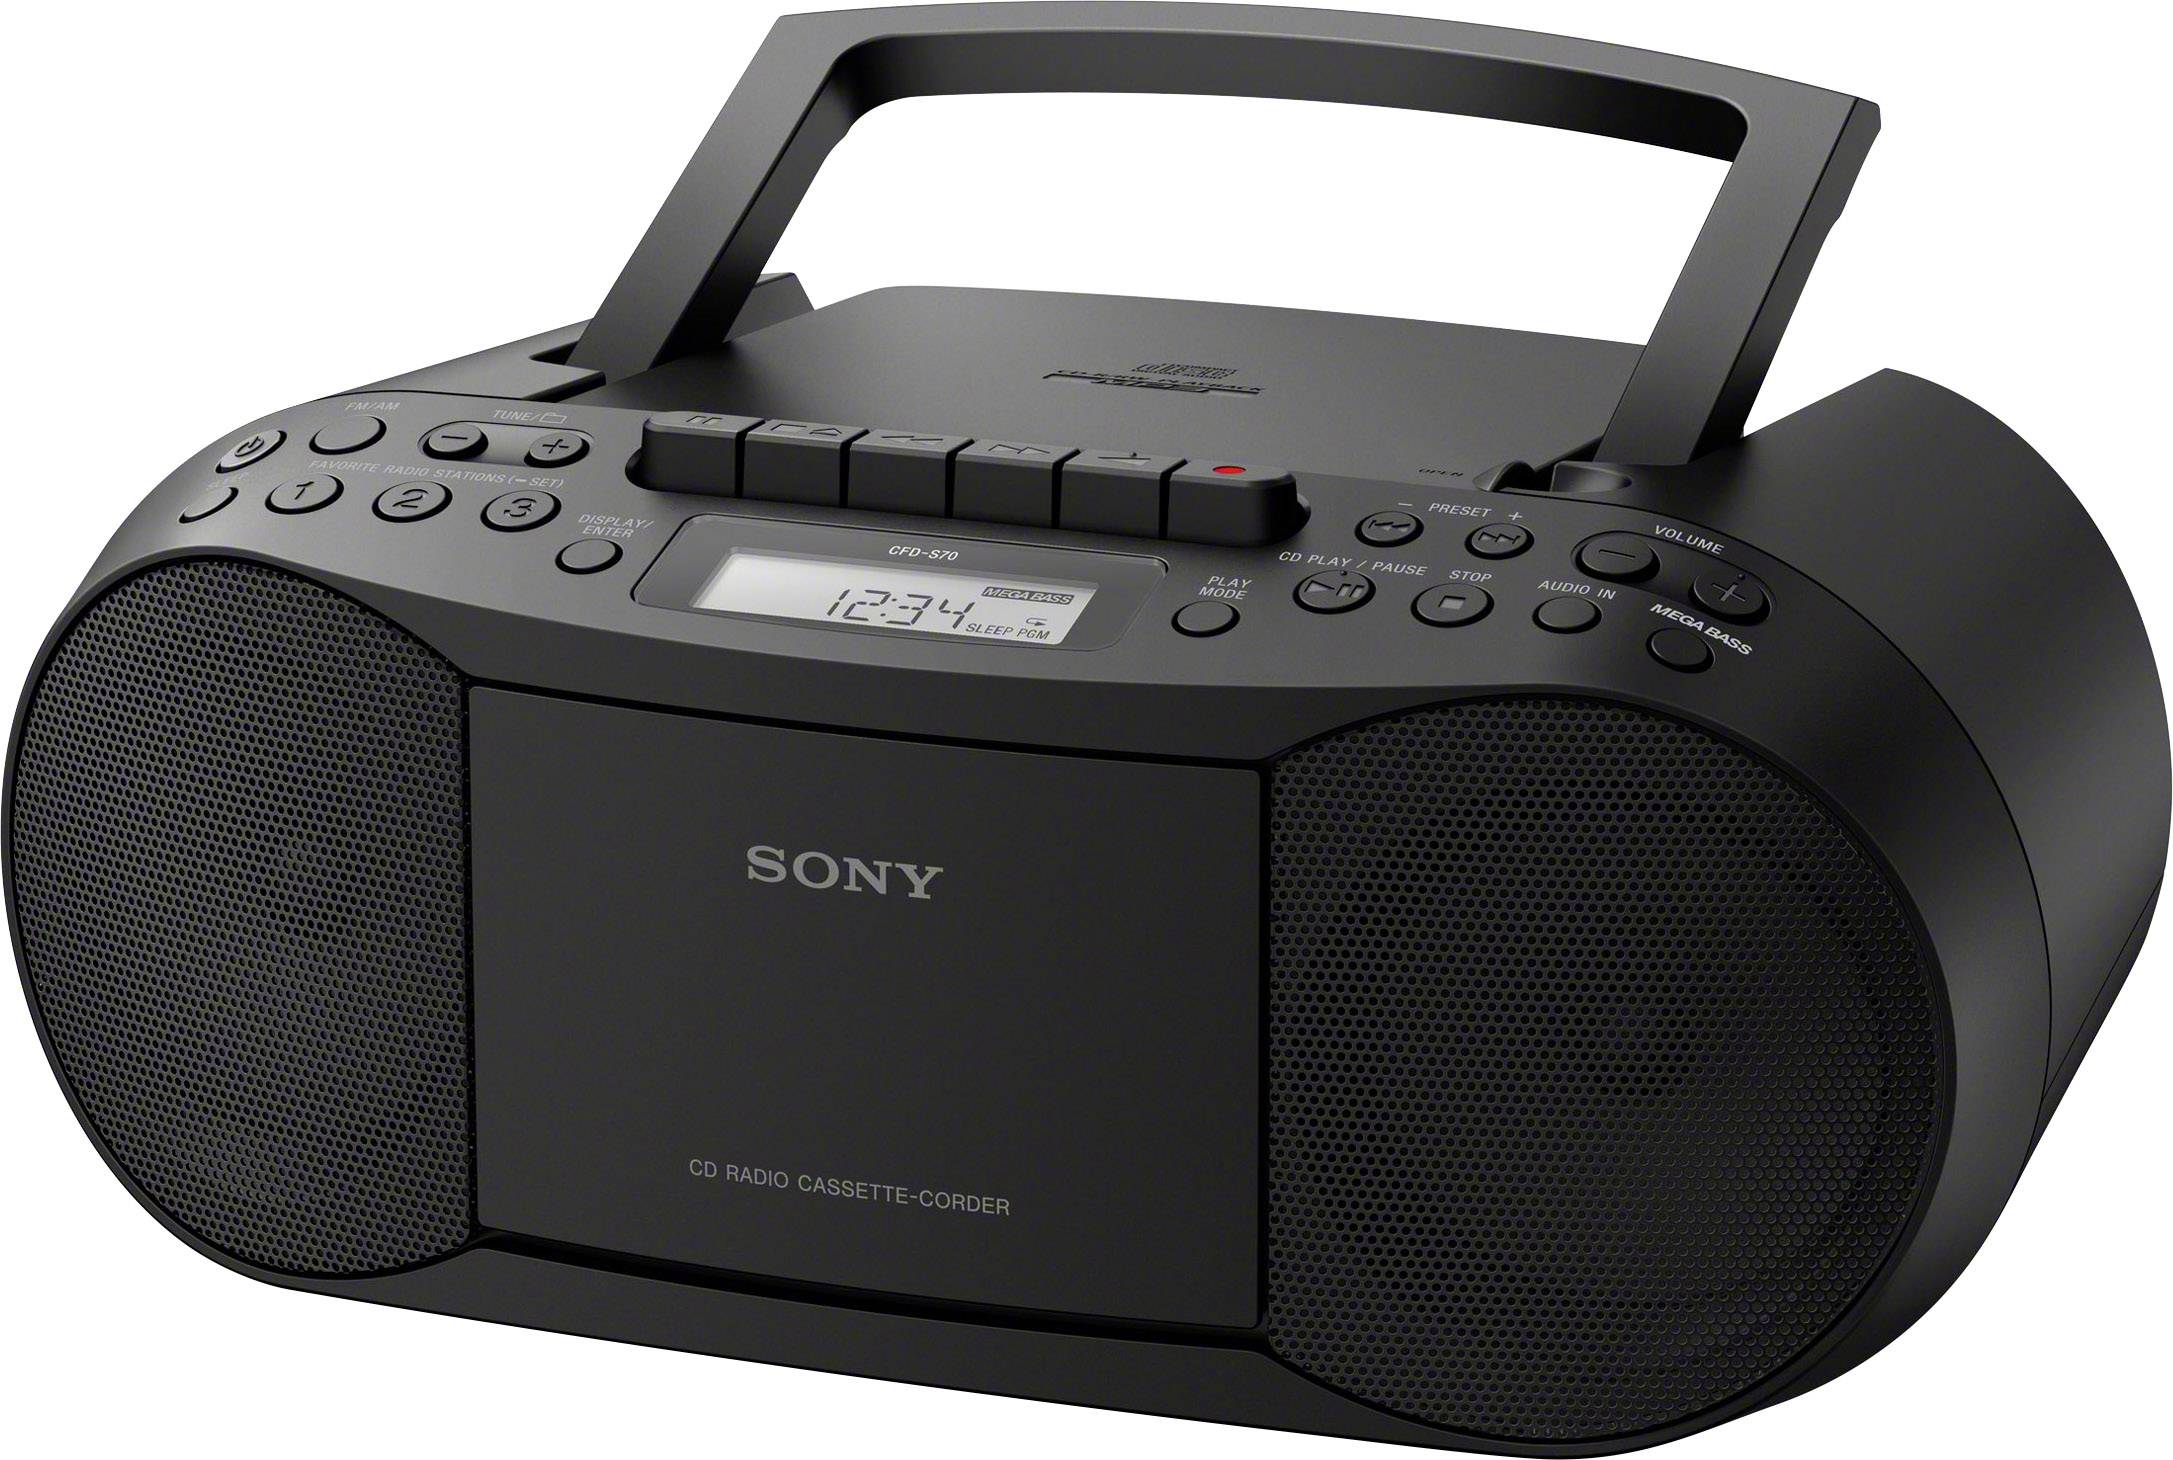 Radio CD player Sony CFD-S70B AUX, CD, Tape Recording mode Black |  